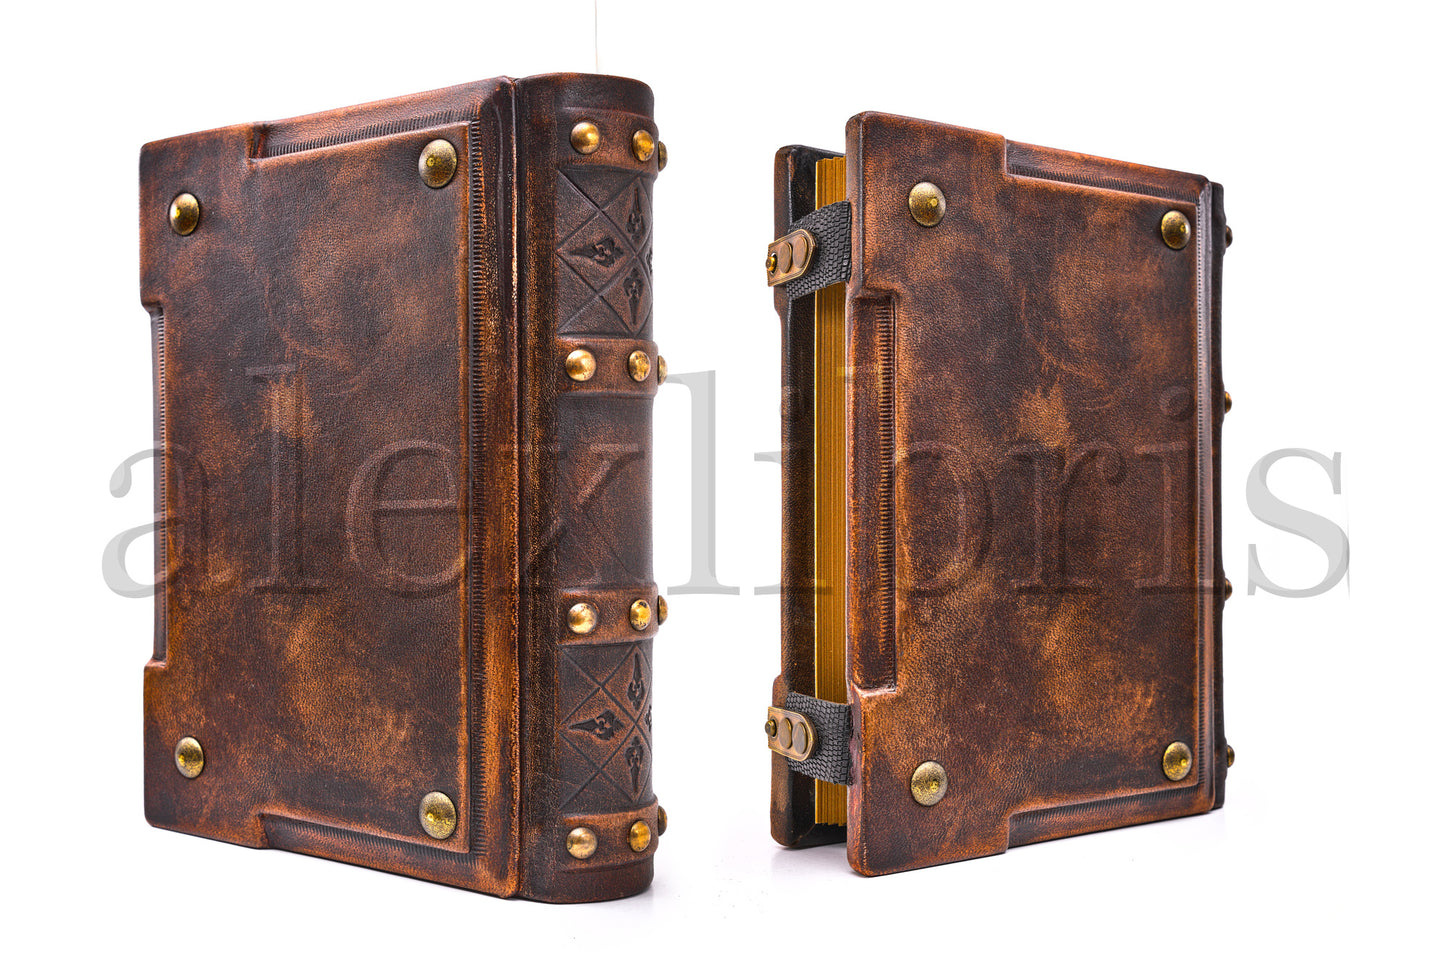 Tree of Life Leather Journal: Large 8 x 10 Inches, 500 Blank Pages, Medieval Style - A Pinnacle of Wisdom and Growth